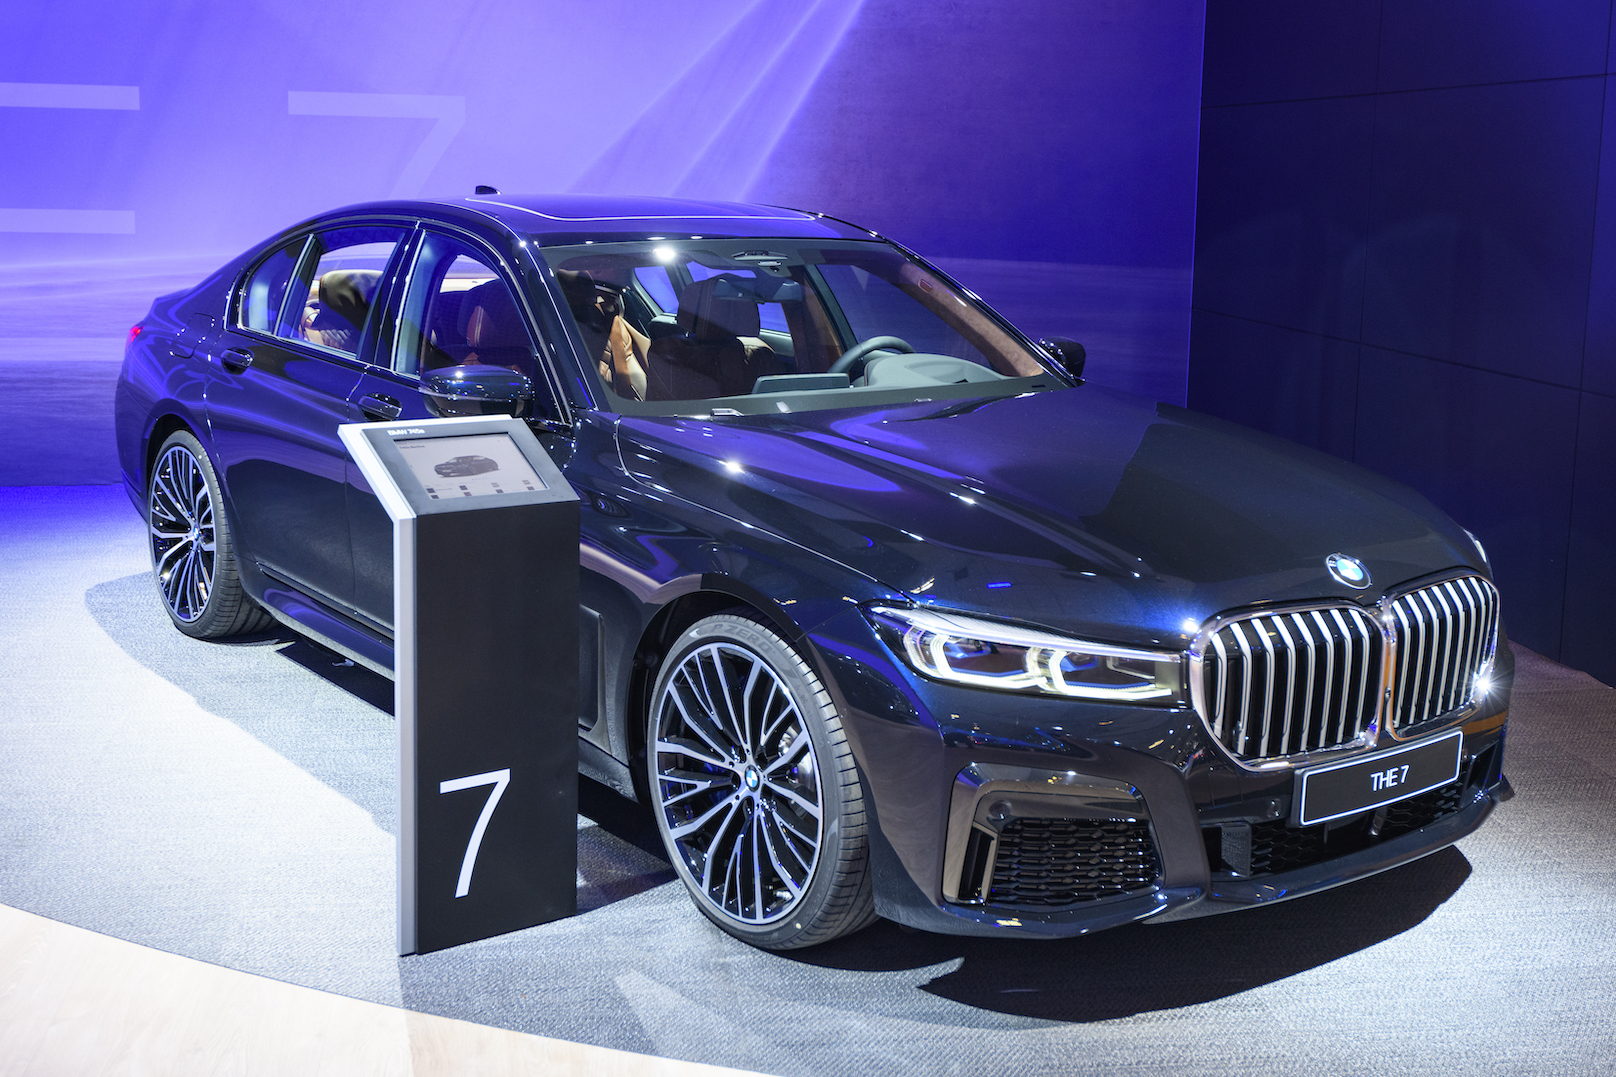 BMW 7 Series 745e plug-in hybrid luxury limousine on display at Brussels Expo